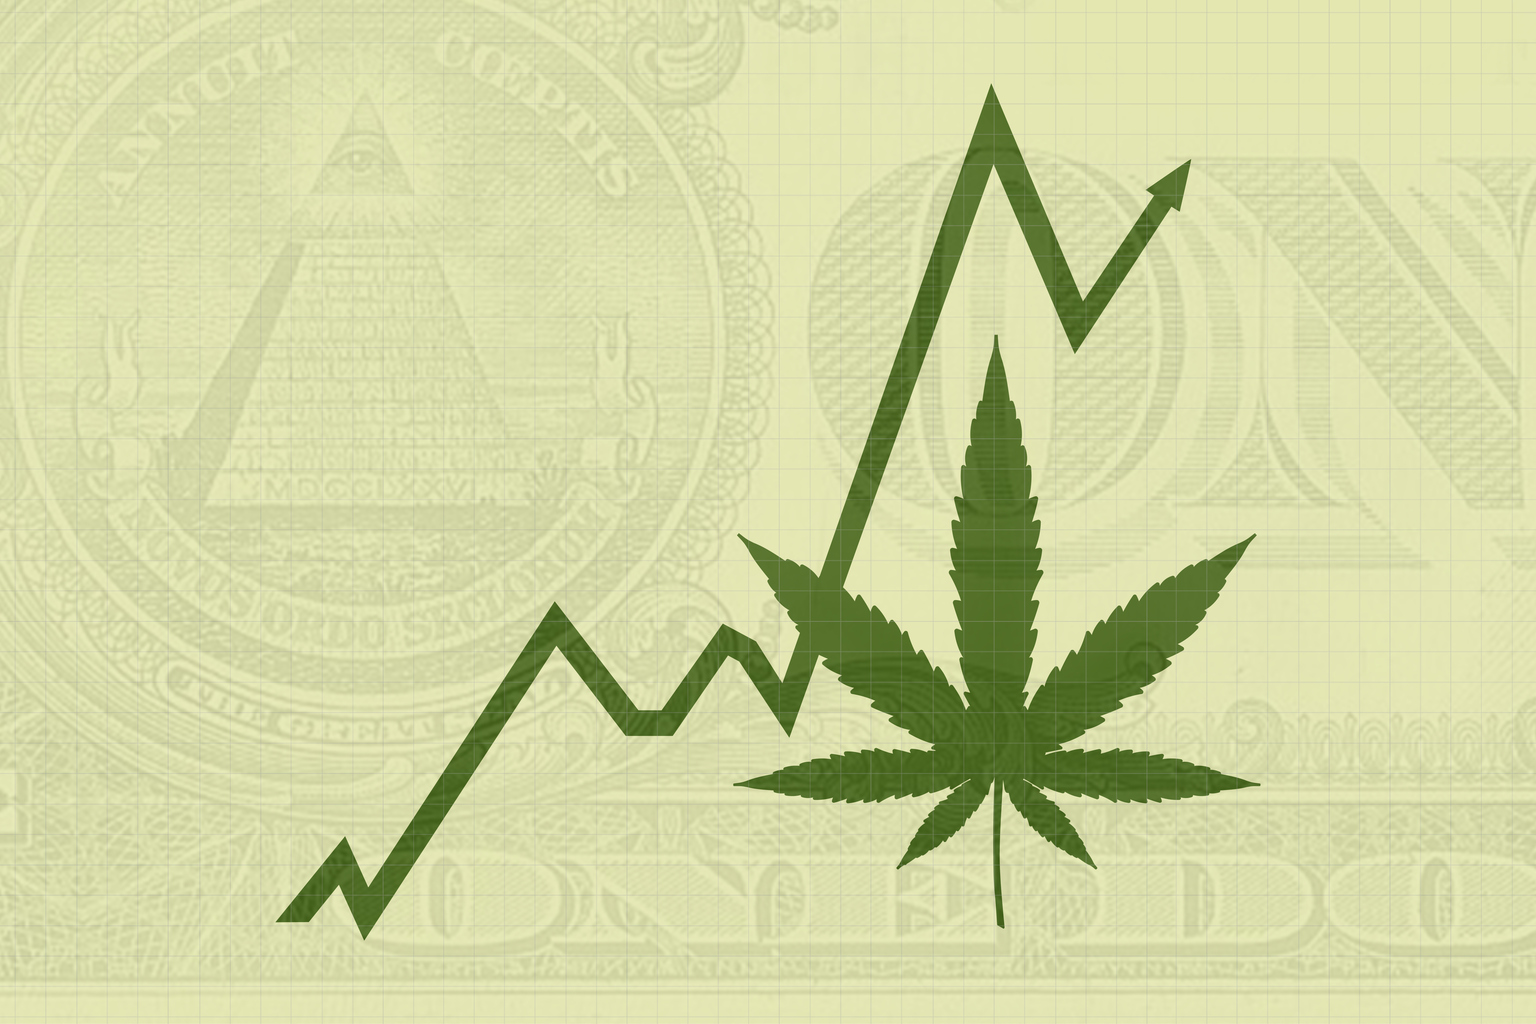 Bipartisan legislation would allow cannabis companies to list on major stock exchanges